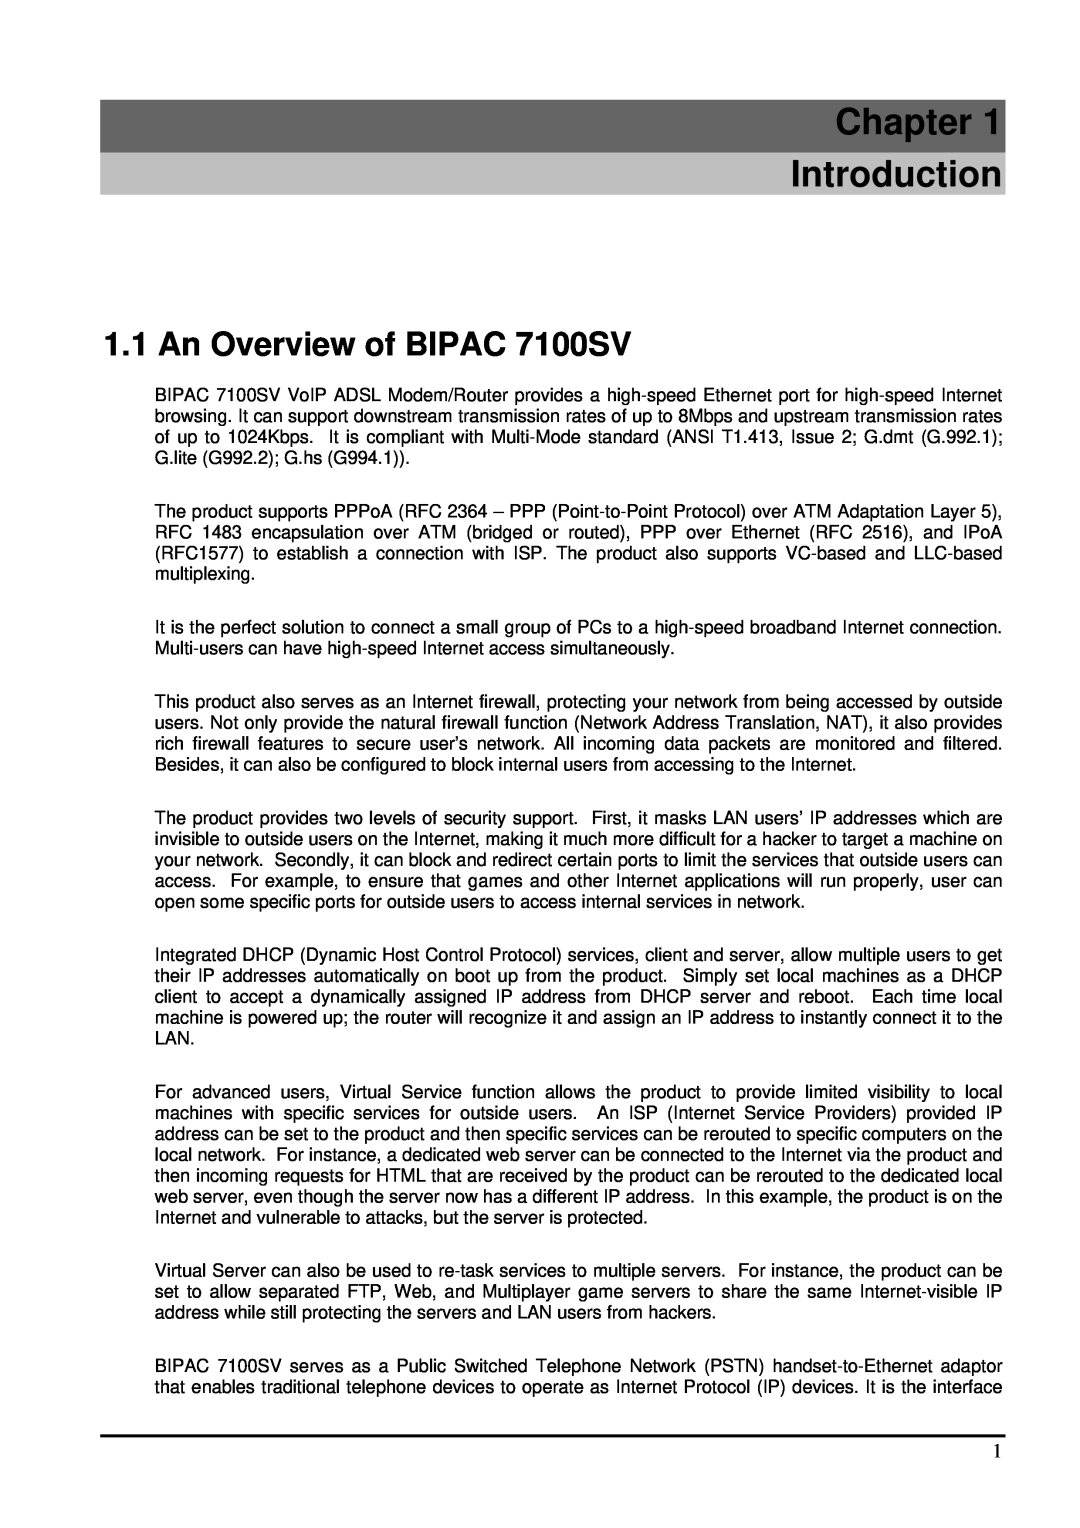 Billion Electric Company manual Chapter Introduction, An Overview of BIPAC 7100SV 